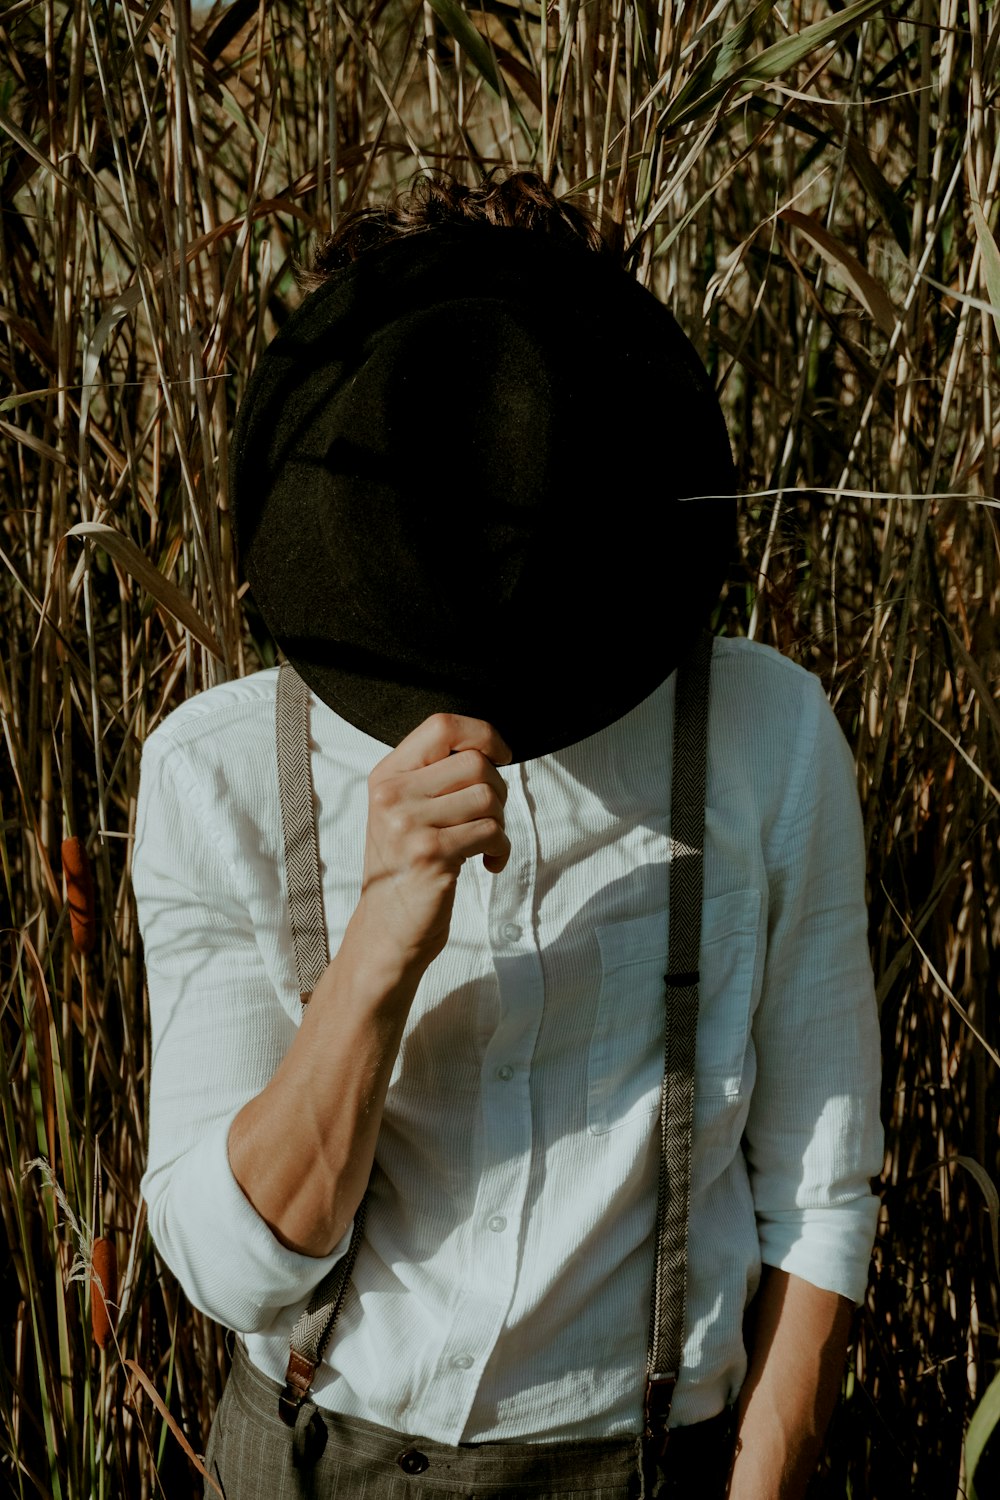 a person wearing a hat and suspenders in a field